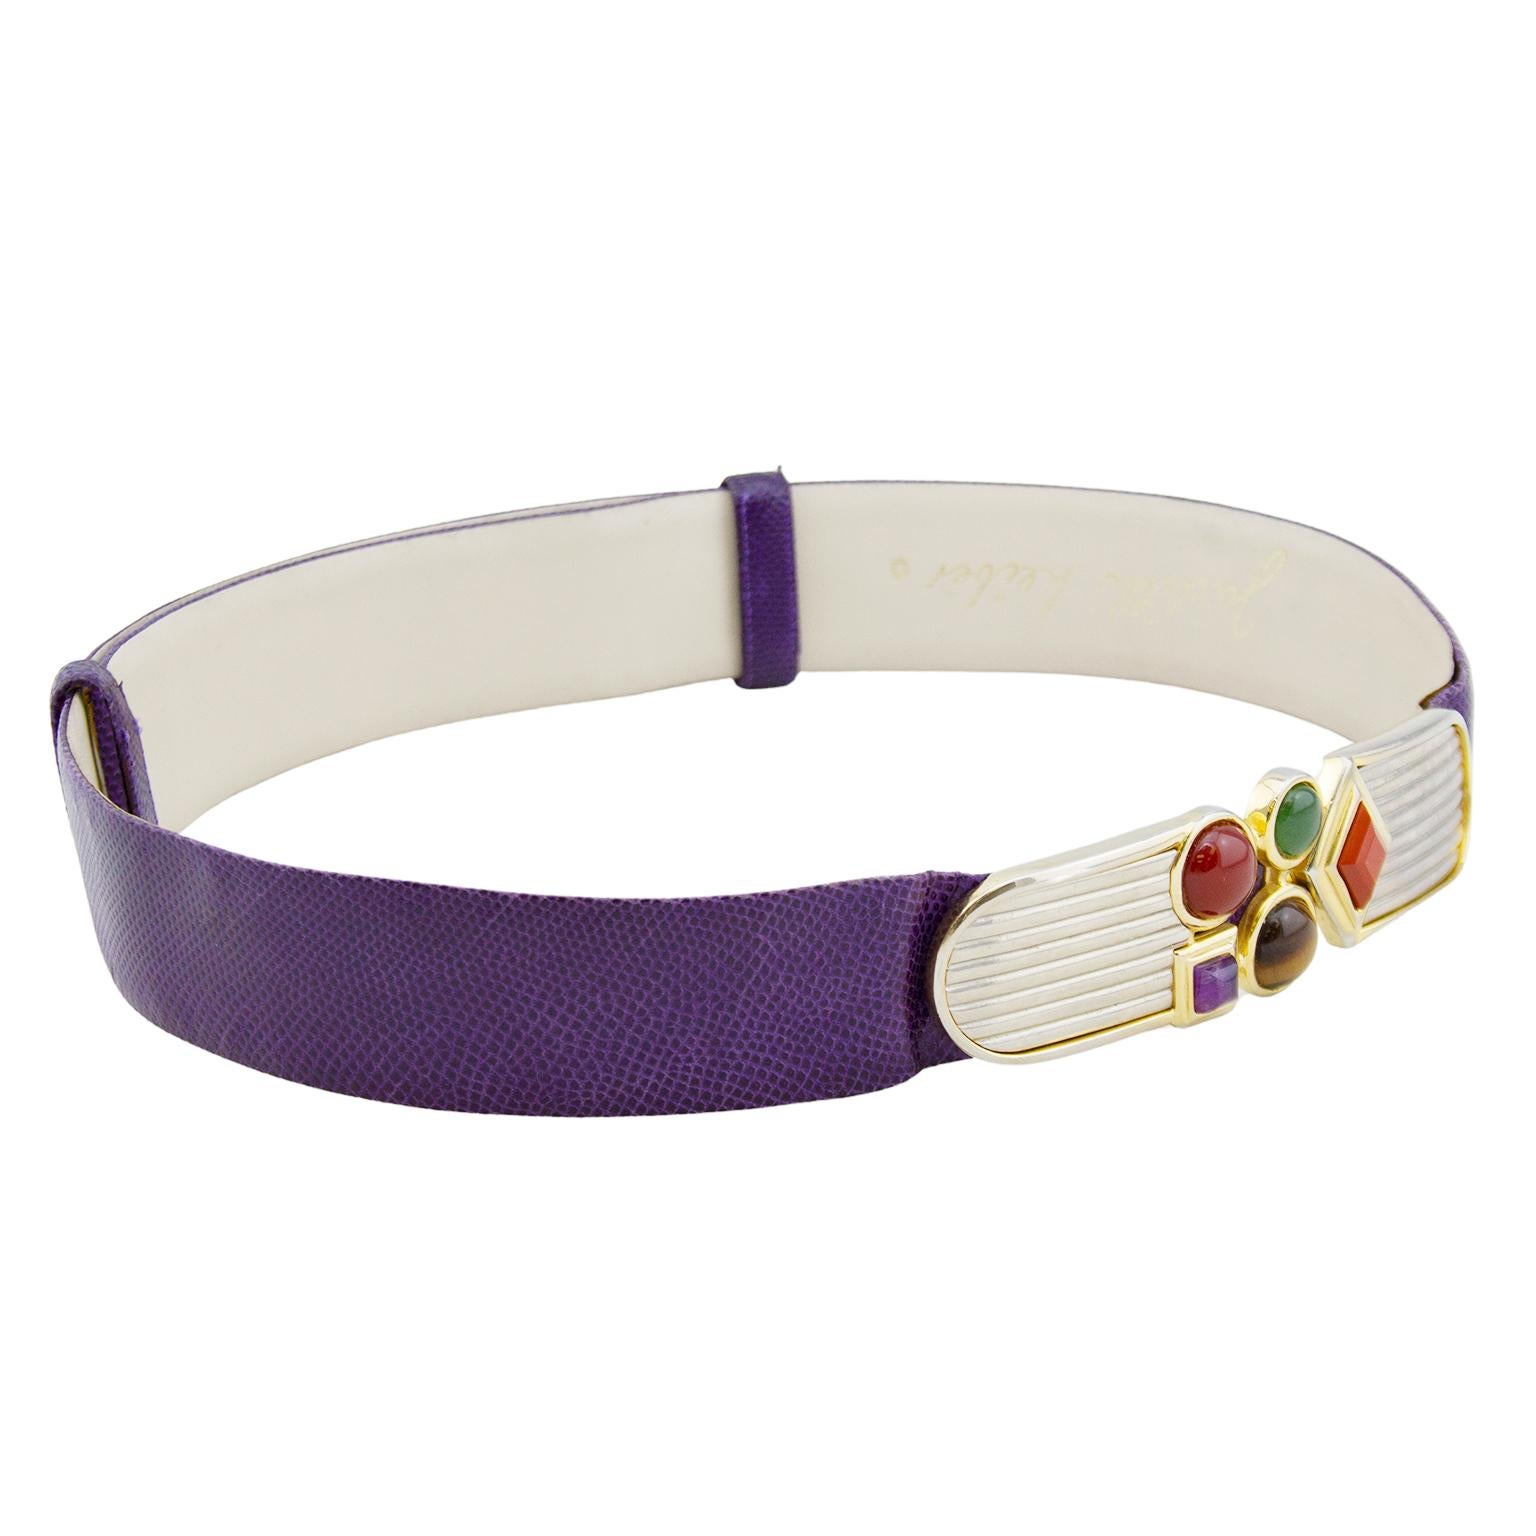 1980s Judith Leiber rich jewel toned purple patterned leather belt. Art Deco silver metal details at buckle with gold tone trim. Purple, green, orange, brown and red geometric cabochons in gold tone metal settings. Buckle closure is metal hook and